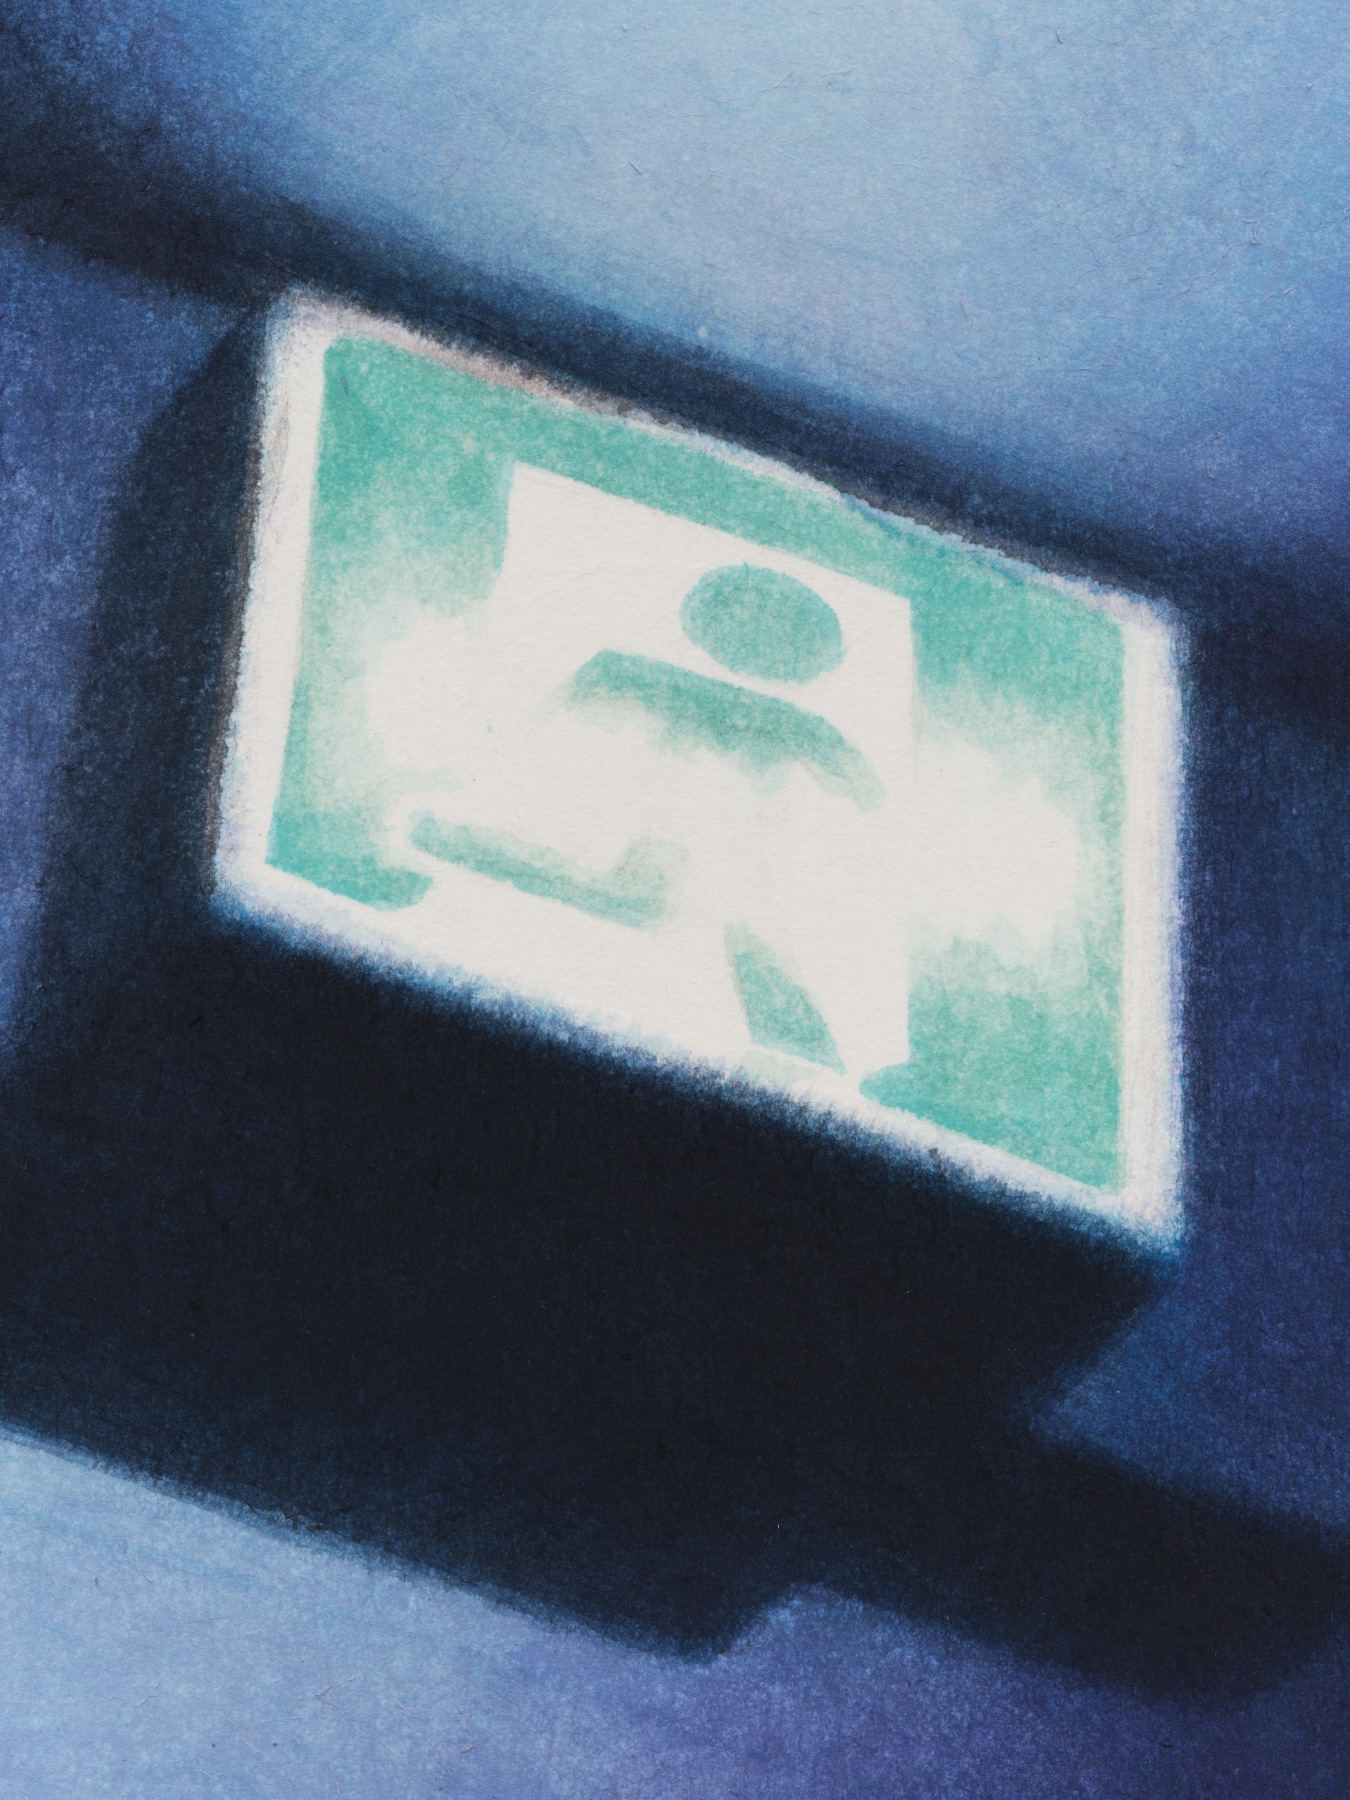 Detail of a glowing exit sign in "Butterfly".